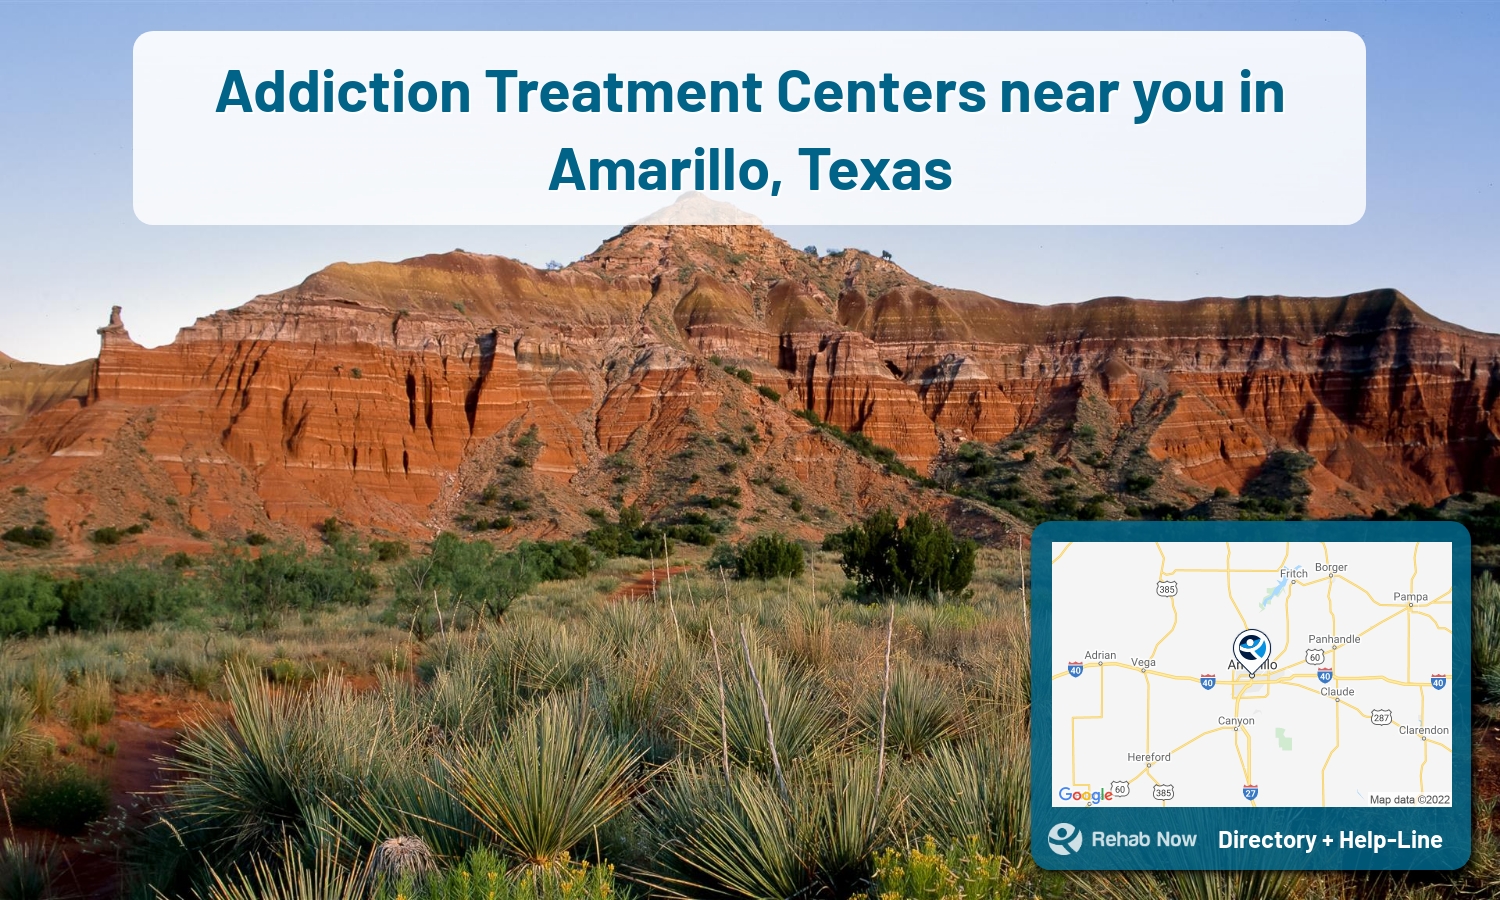 Our experts can help you find treatment now in Amarillo, Texas. We list drug rehab and alcohol centers in Texas.